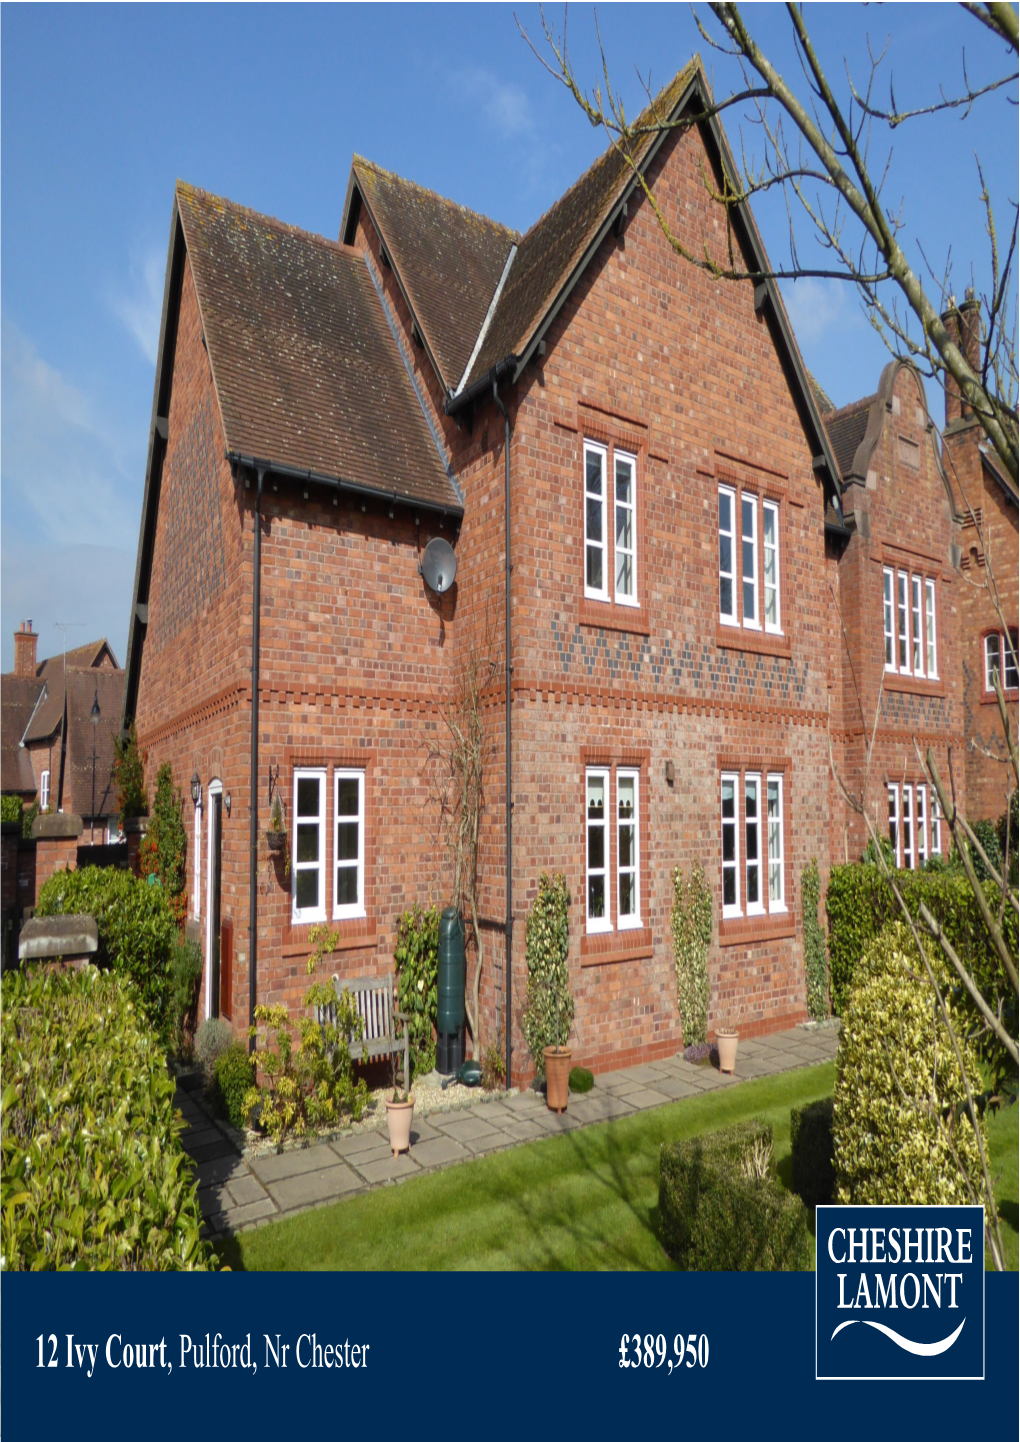 12 Ivy Court, Pulford, Nr Chester £389,950